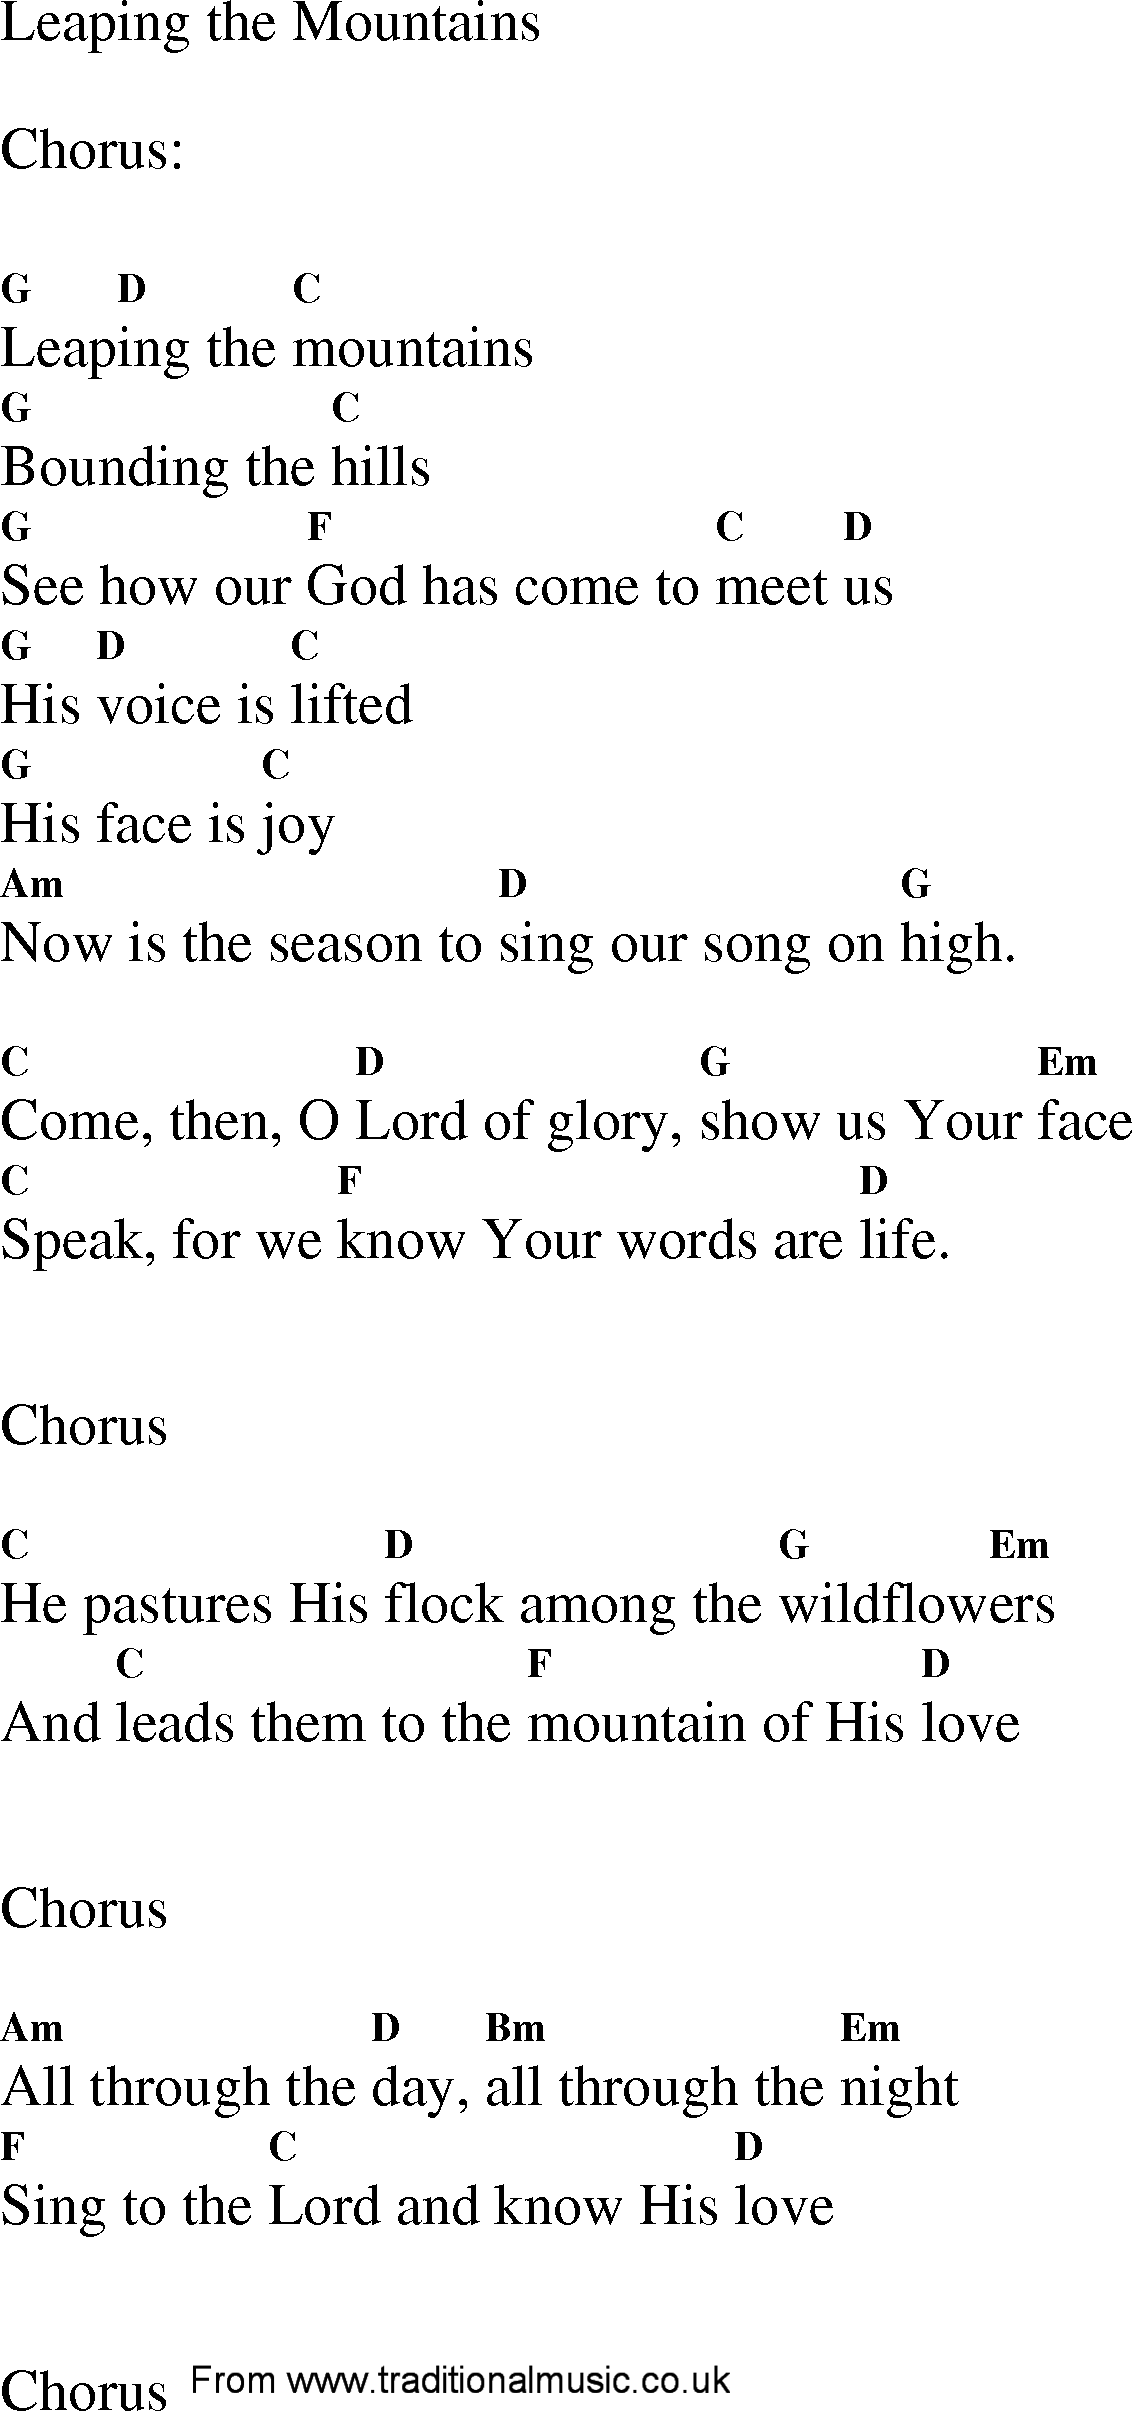 Gospel Song: leaping_the_mountains, lyrics and chords.